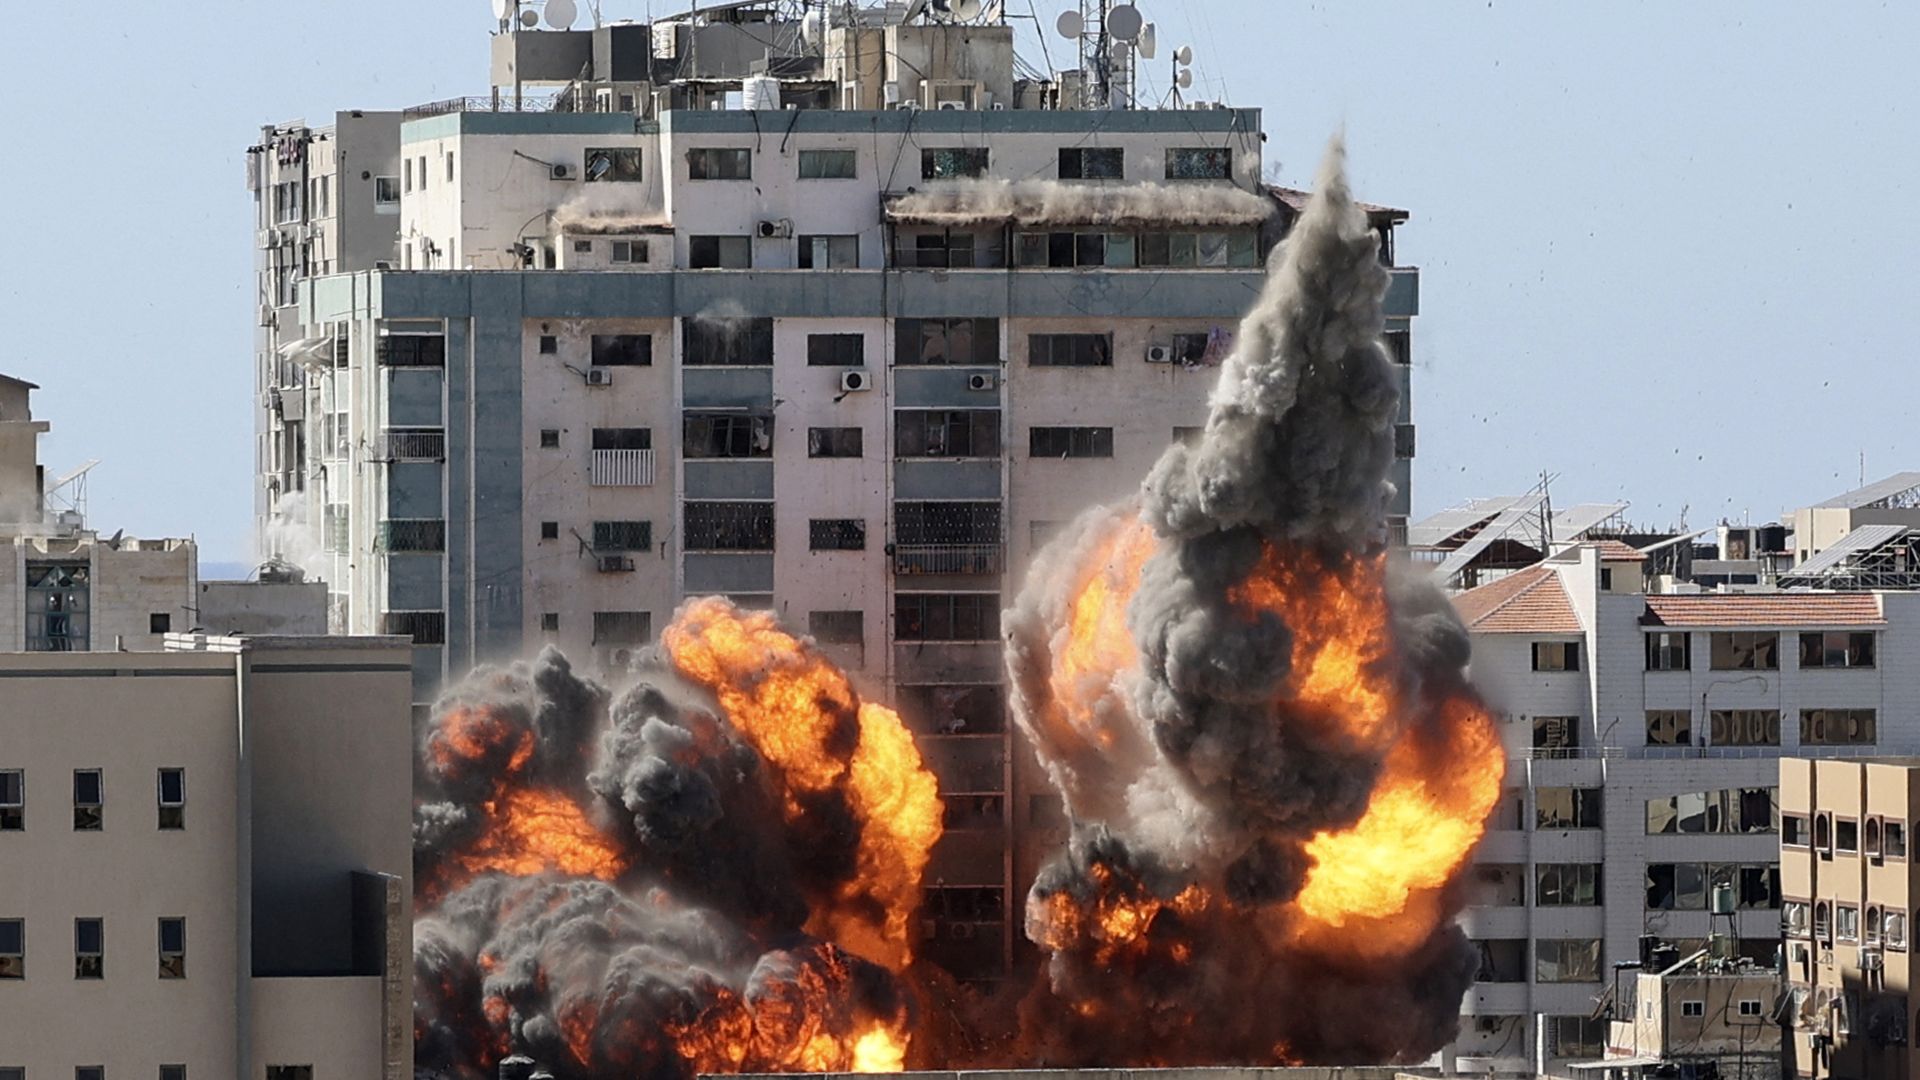  A ball of fire erupts from the Jala Tower as it is destroyed in an Israeli airstrike in Gaza city controlled by the Palestinian Hamas movement, on May 15